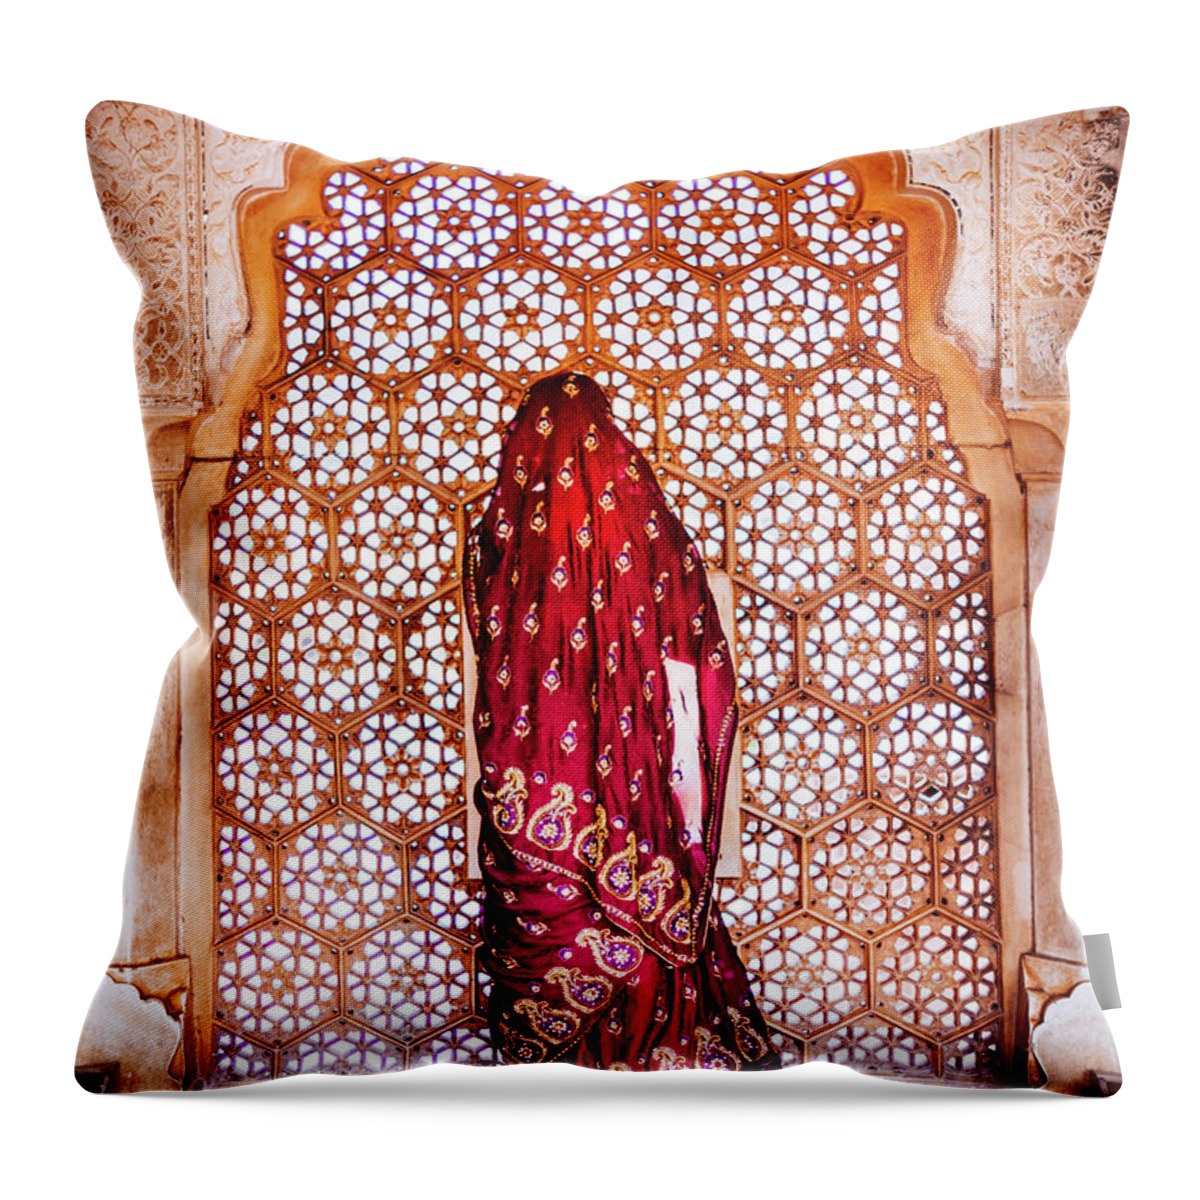 Arch Throw Pillow featuring the photograph Woman In Sari At Decorated Window by Rich Jones Photography